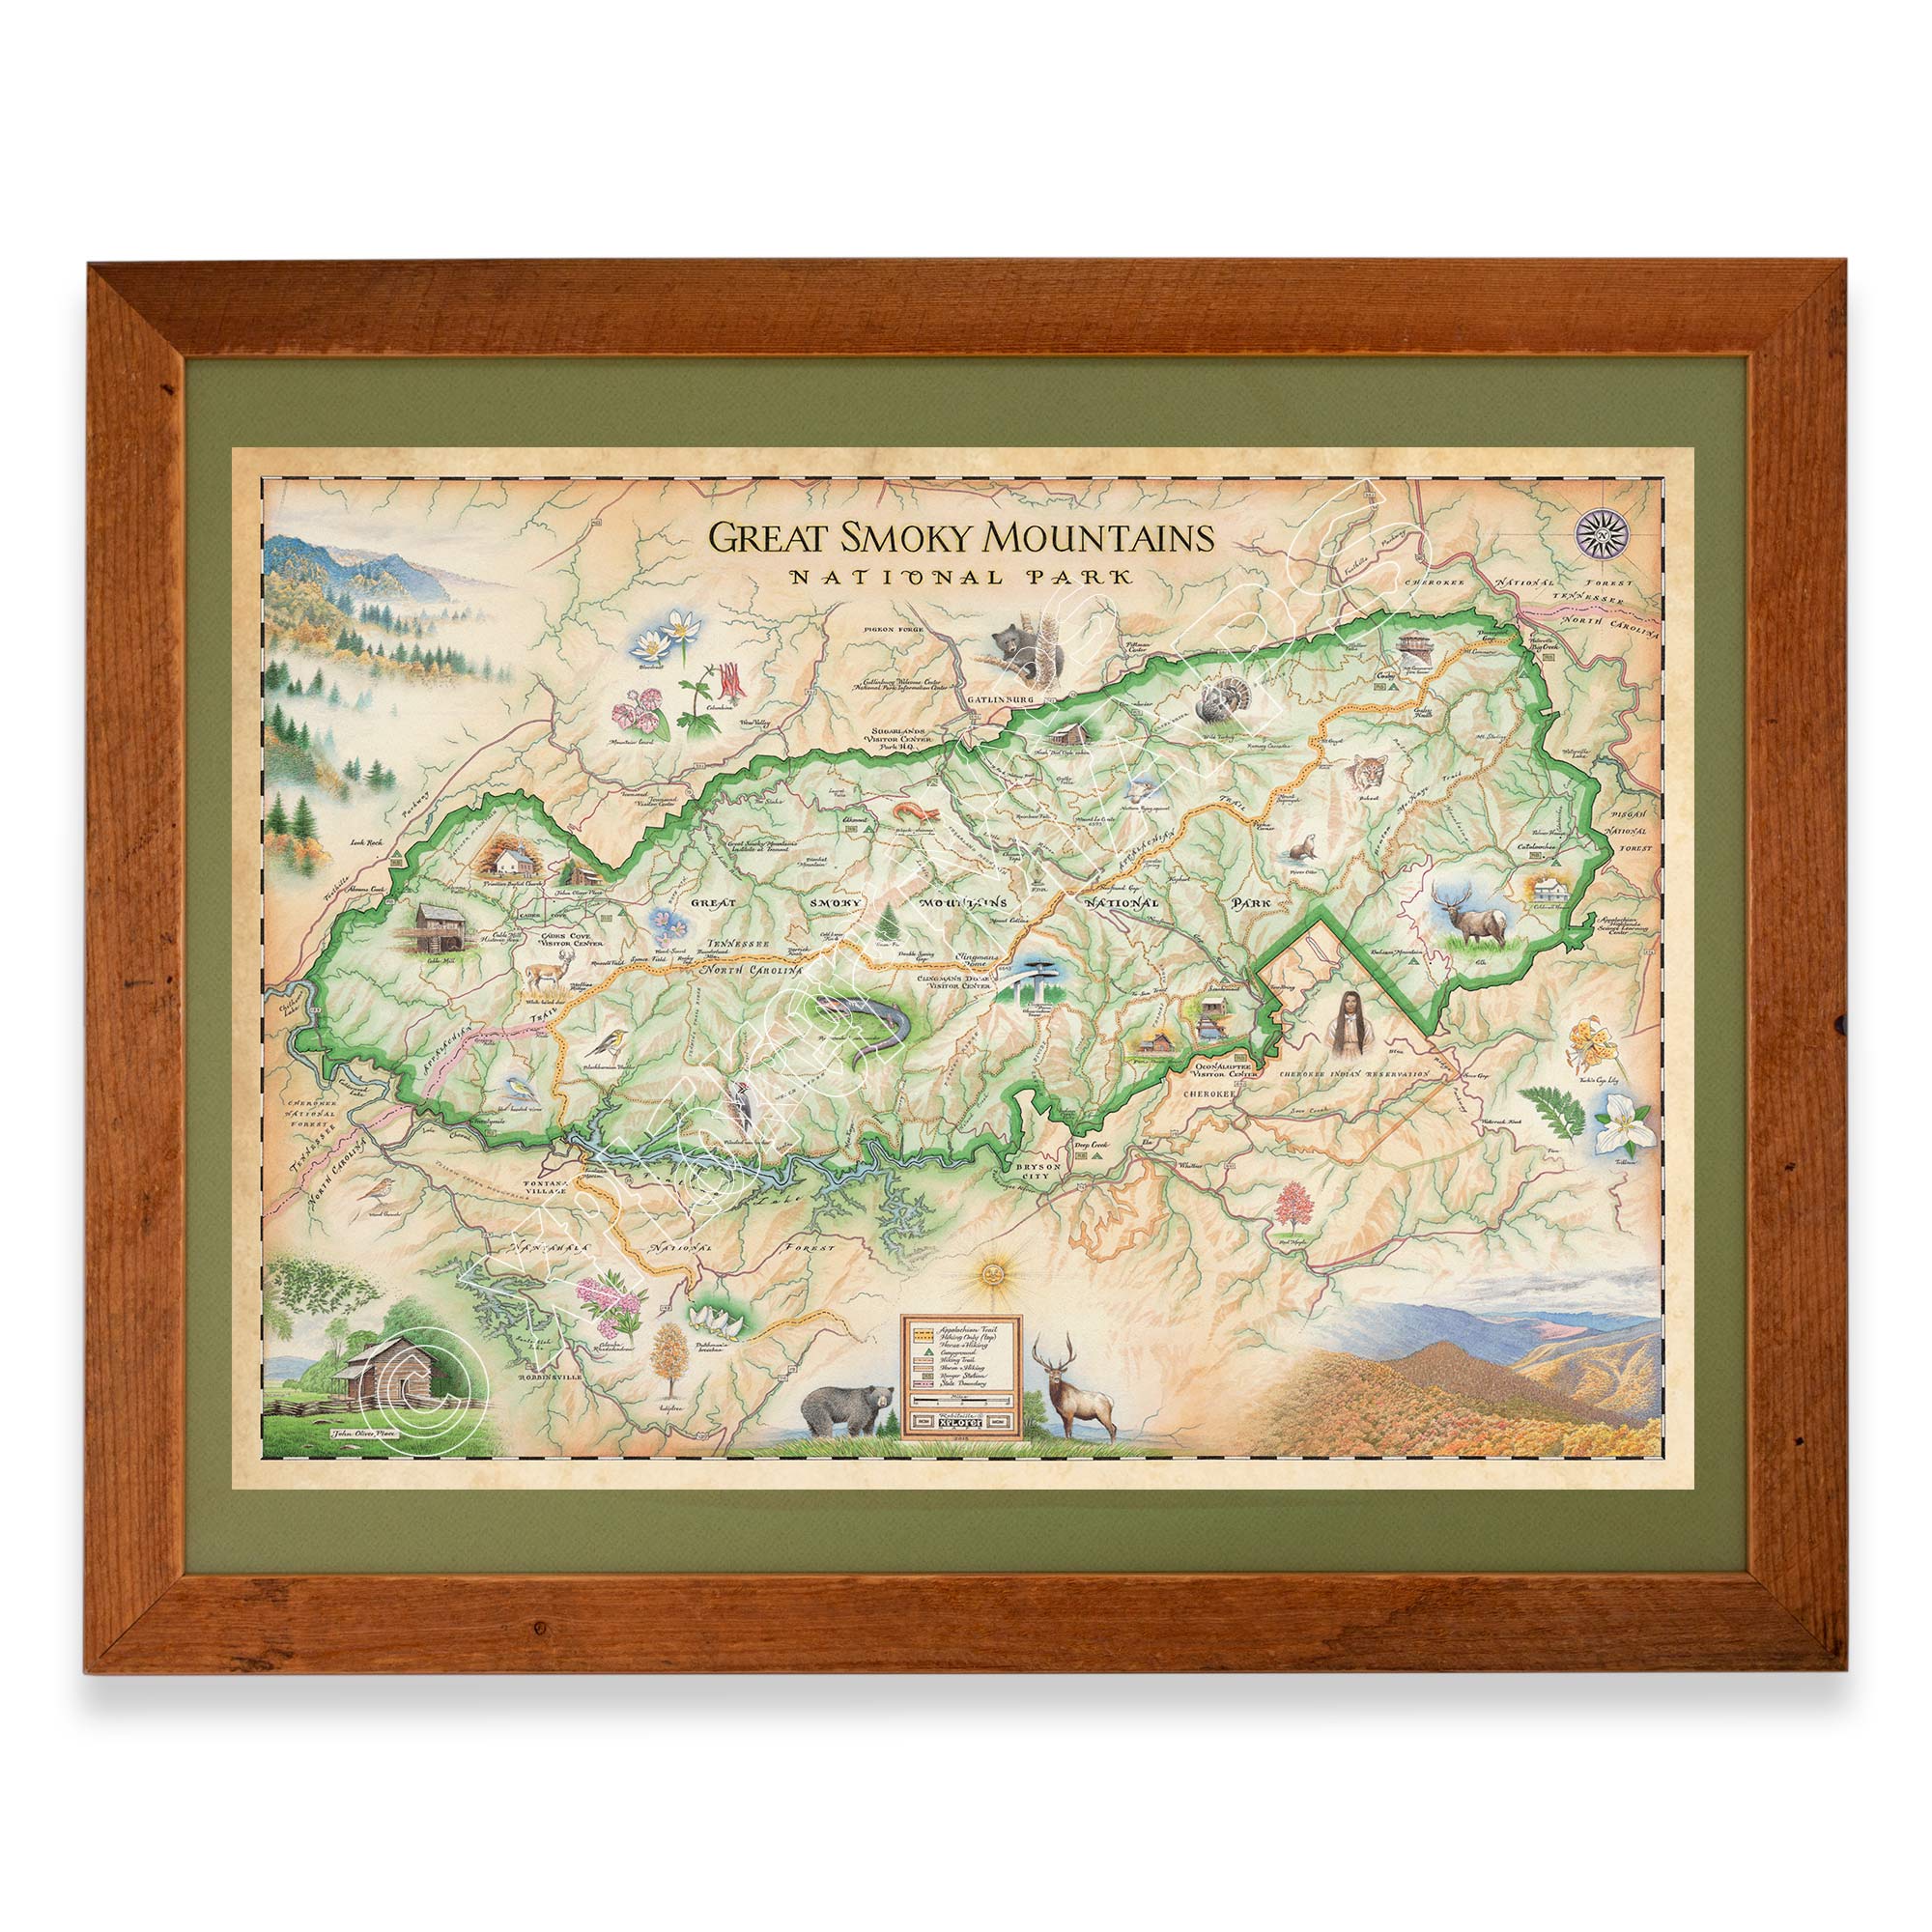 Great Smoky Mountains National Park Hand-Drawn Map